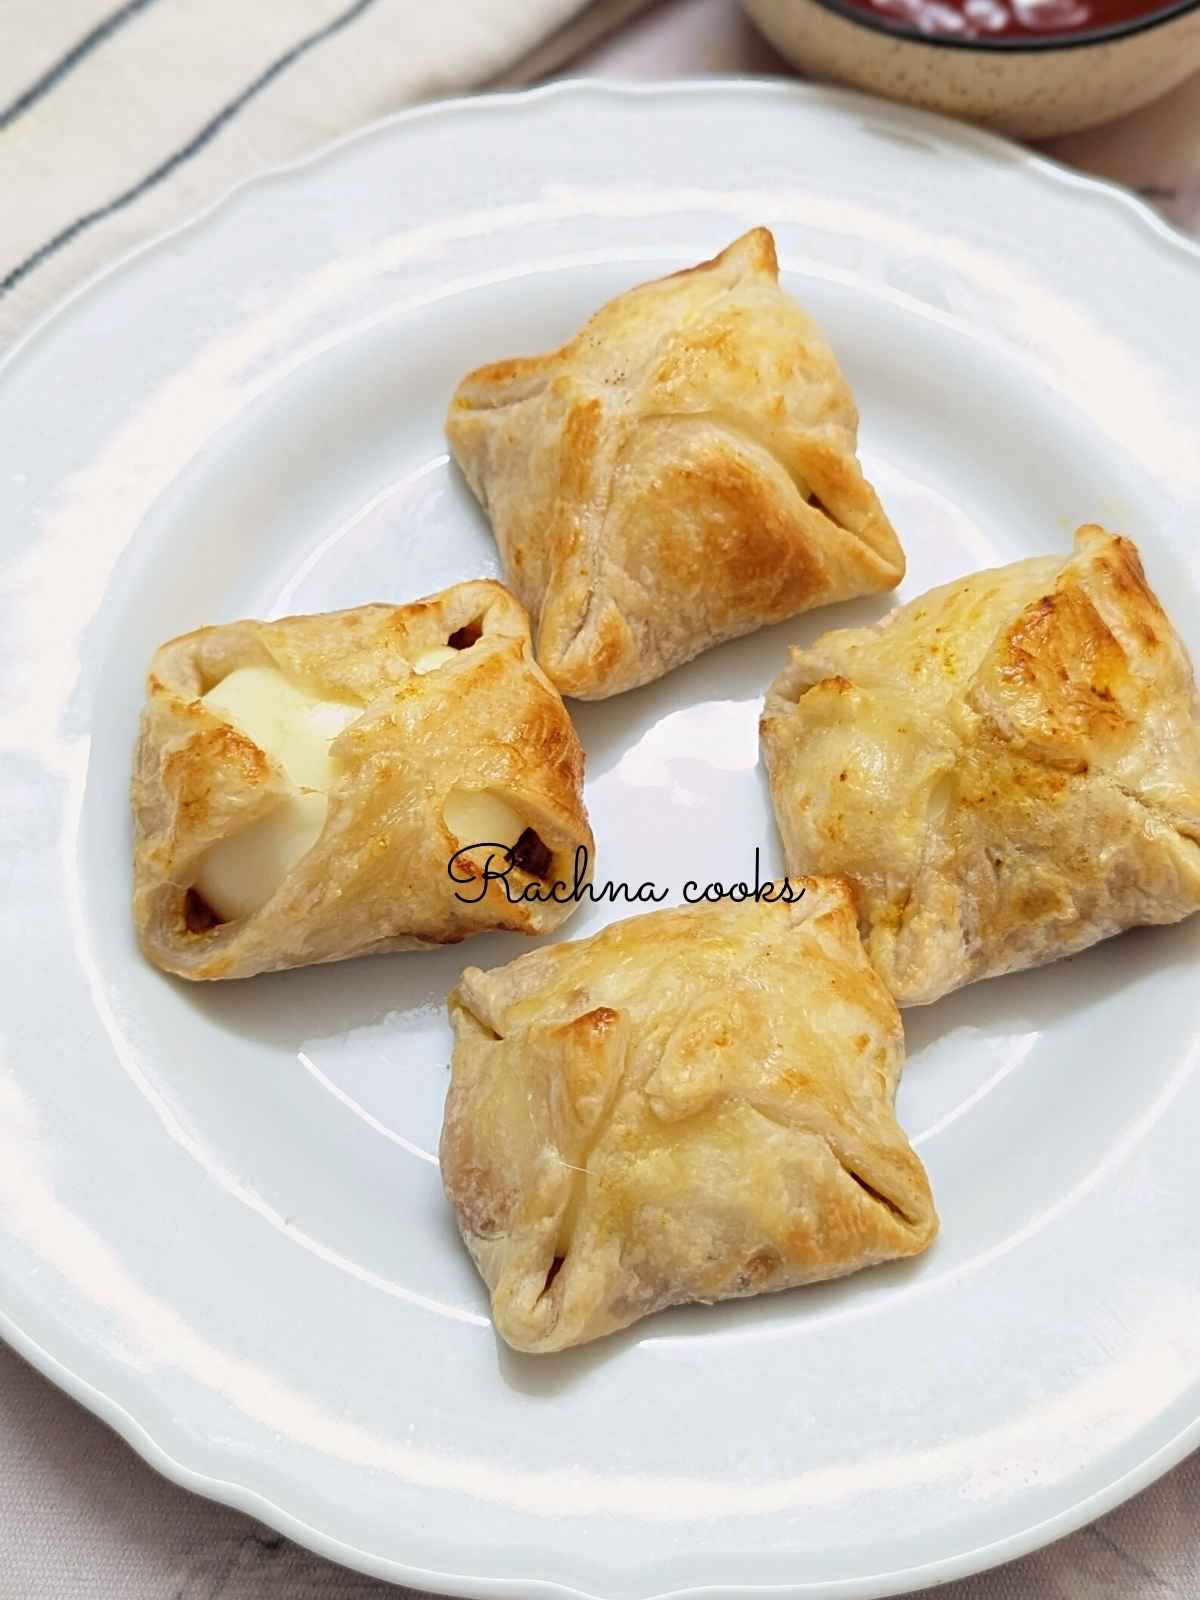 4 egg puffs served on a white plate.